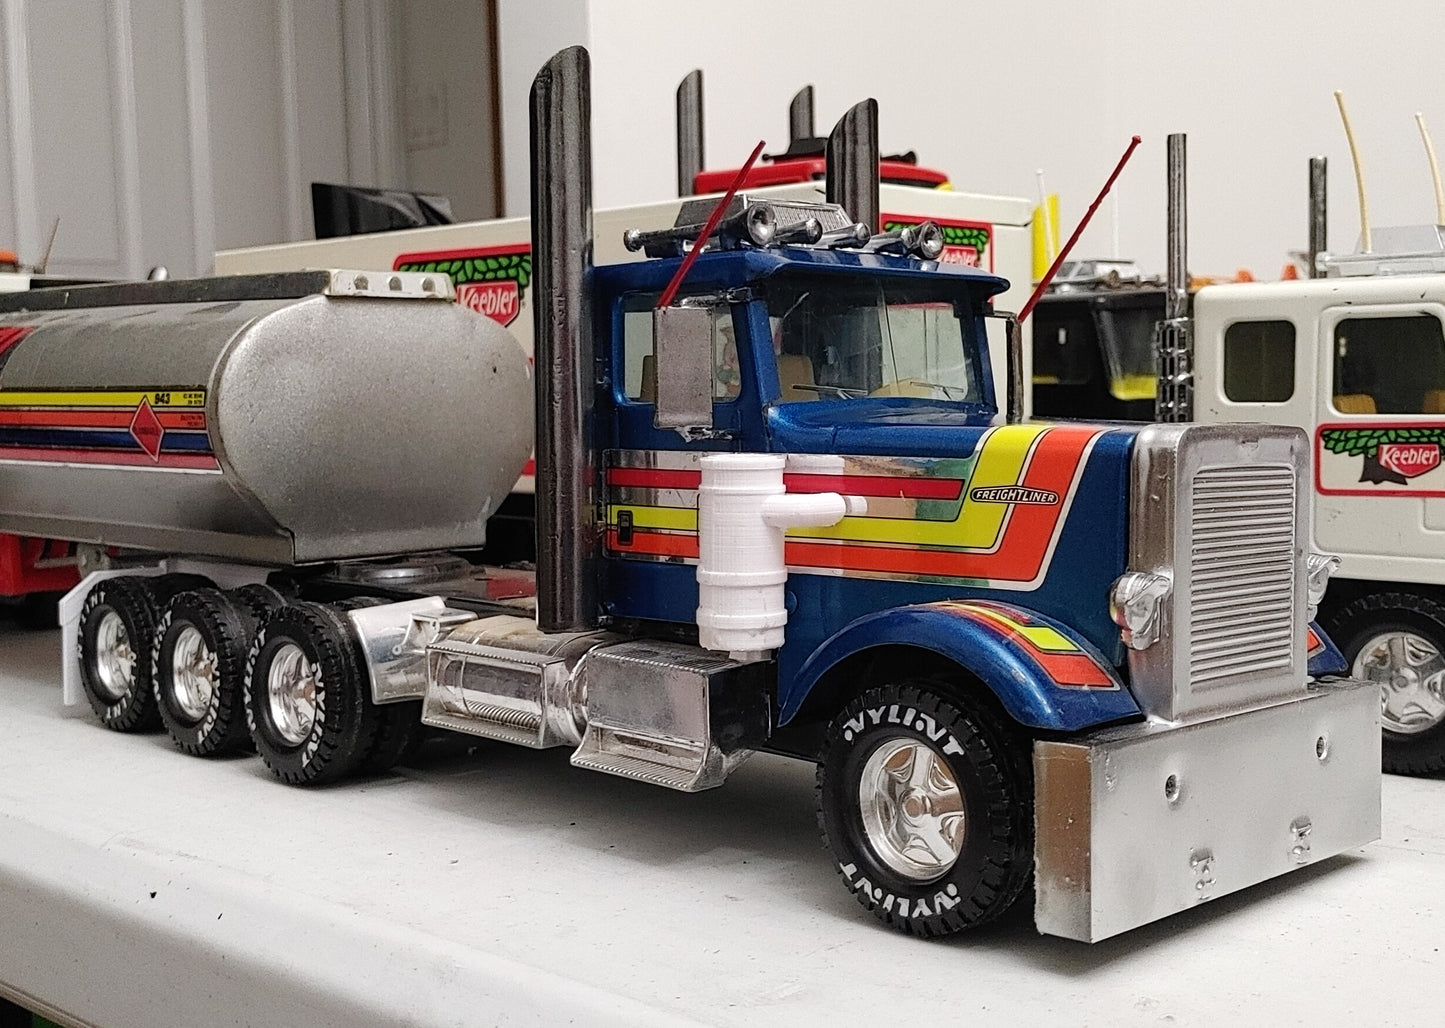 NYLINT Air Cleaner Set Freightliner [ SCALE: 1/18 ]